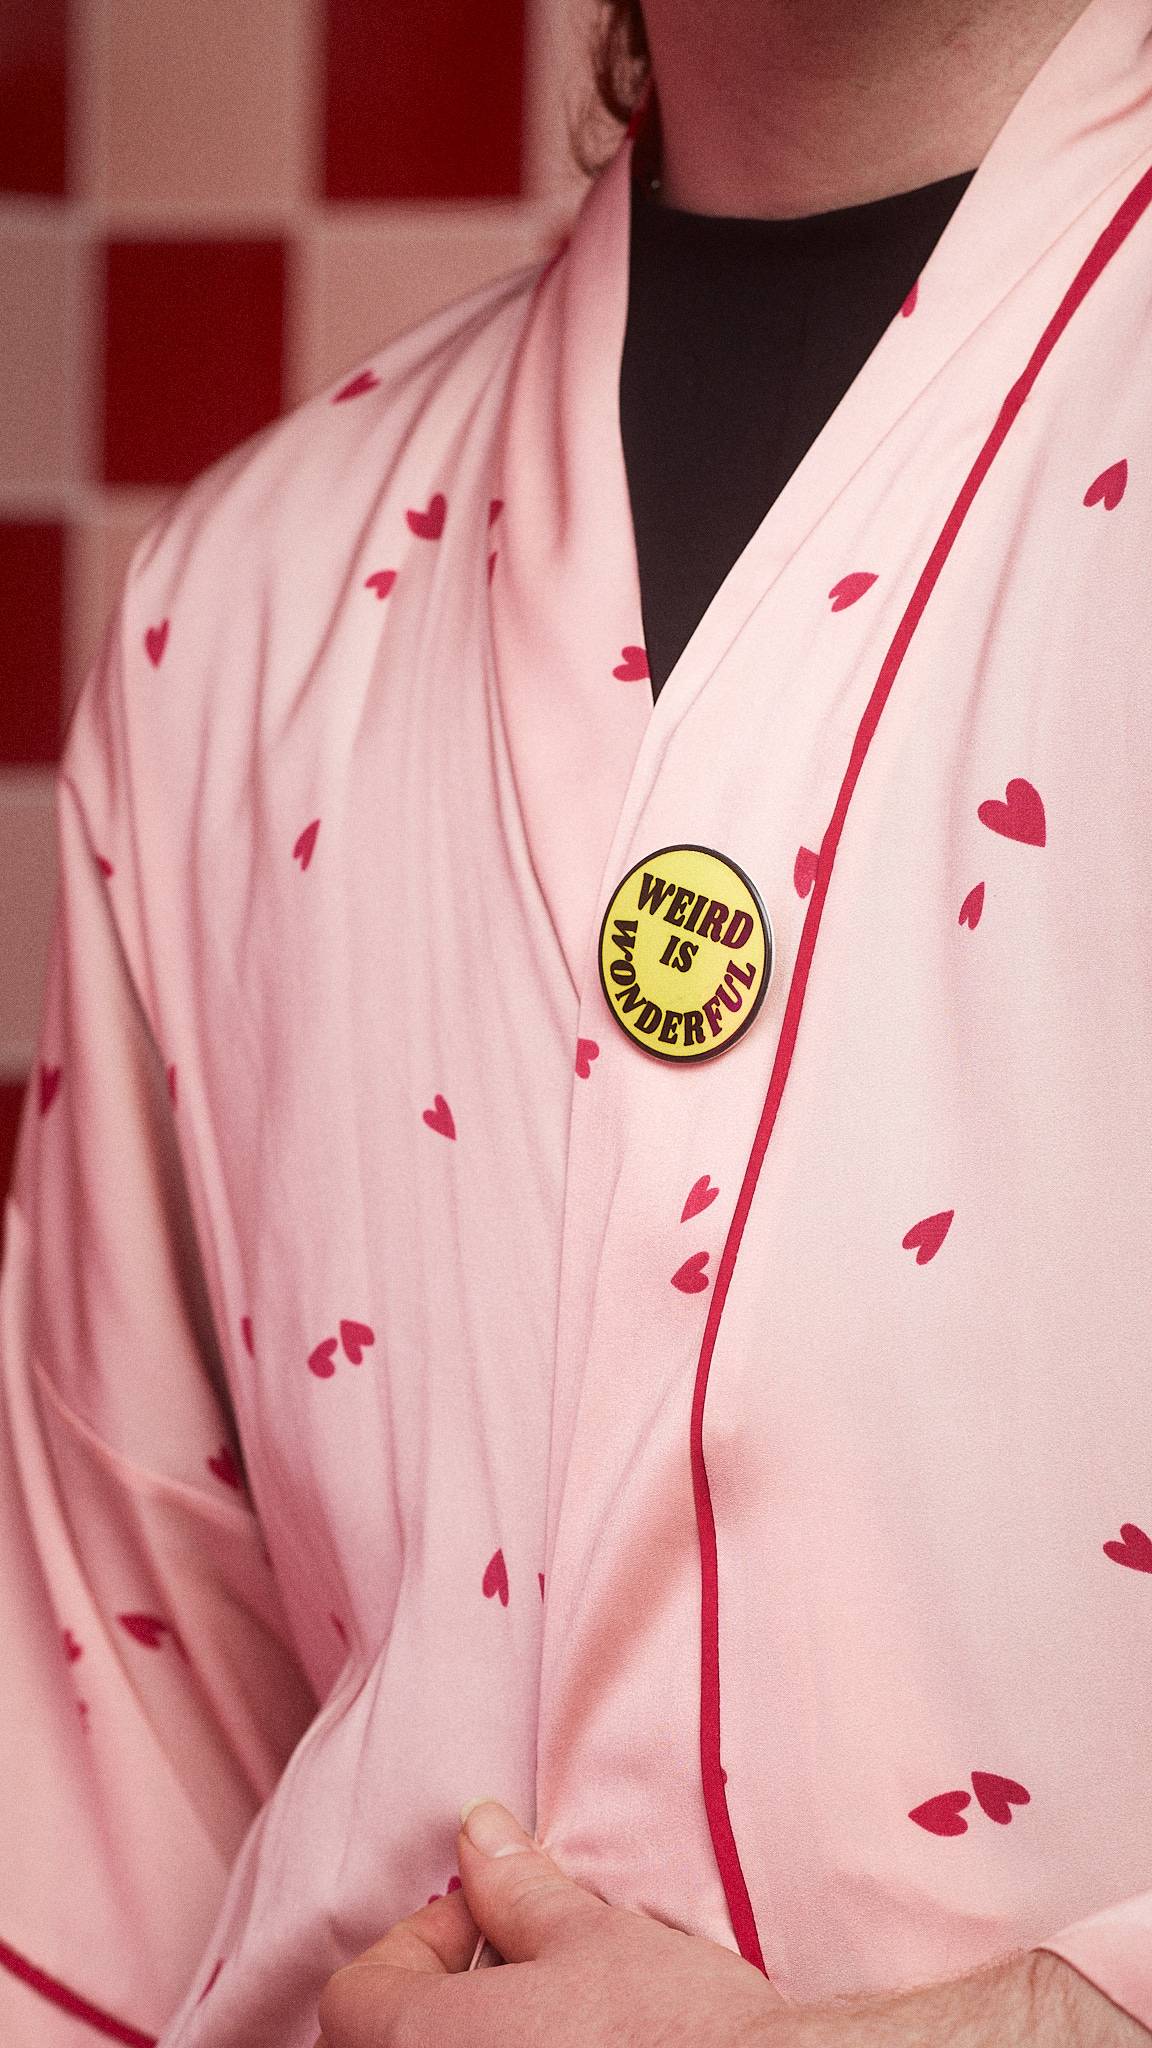 Model is wearing a white robe dotted with hearts. A bright yellow badge sits on the lapel with the words "Weird is Wonderful" in black.